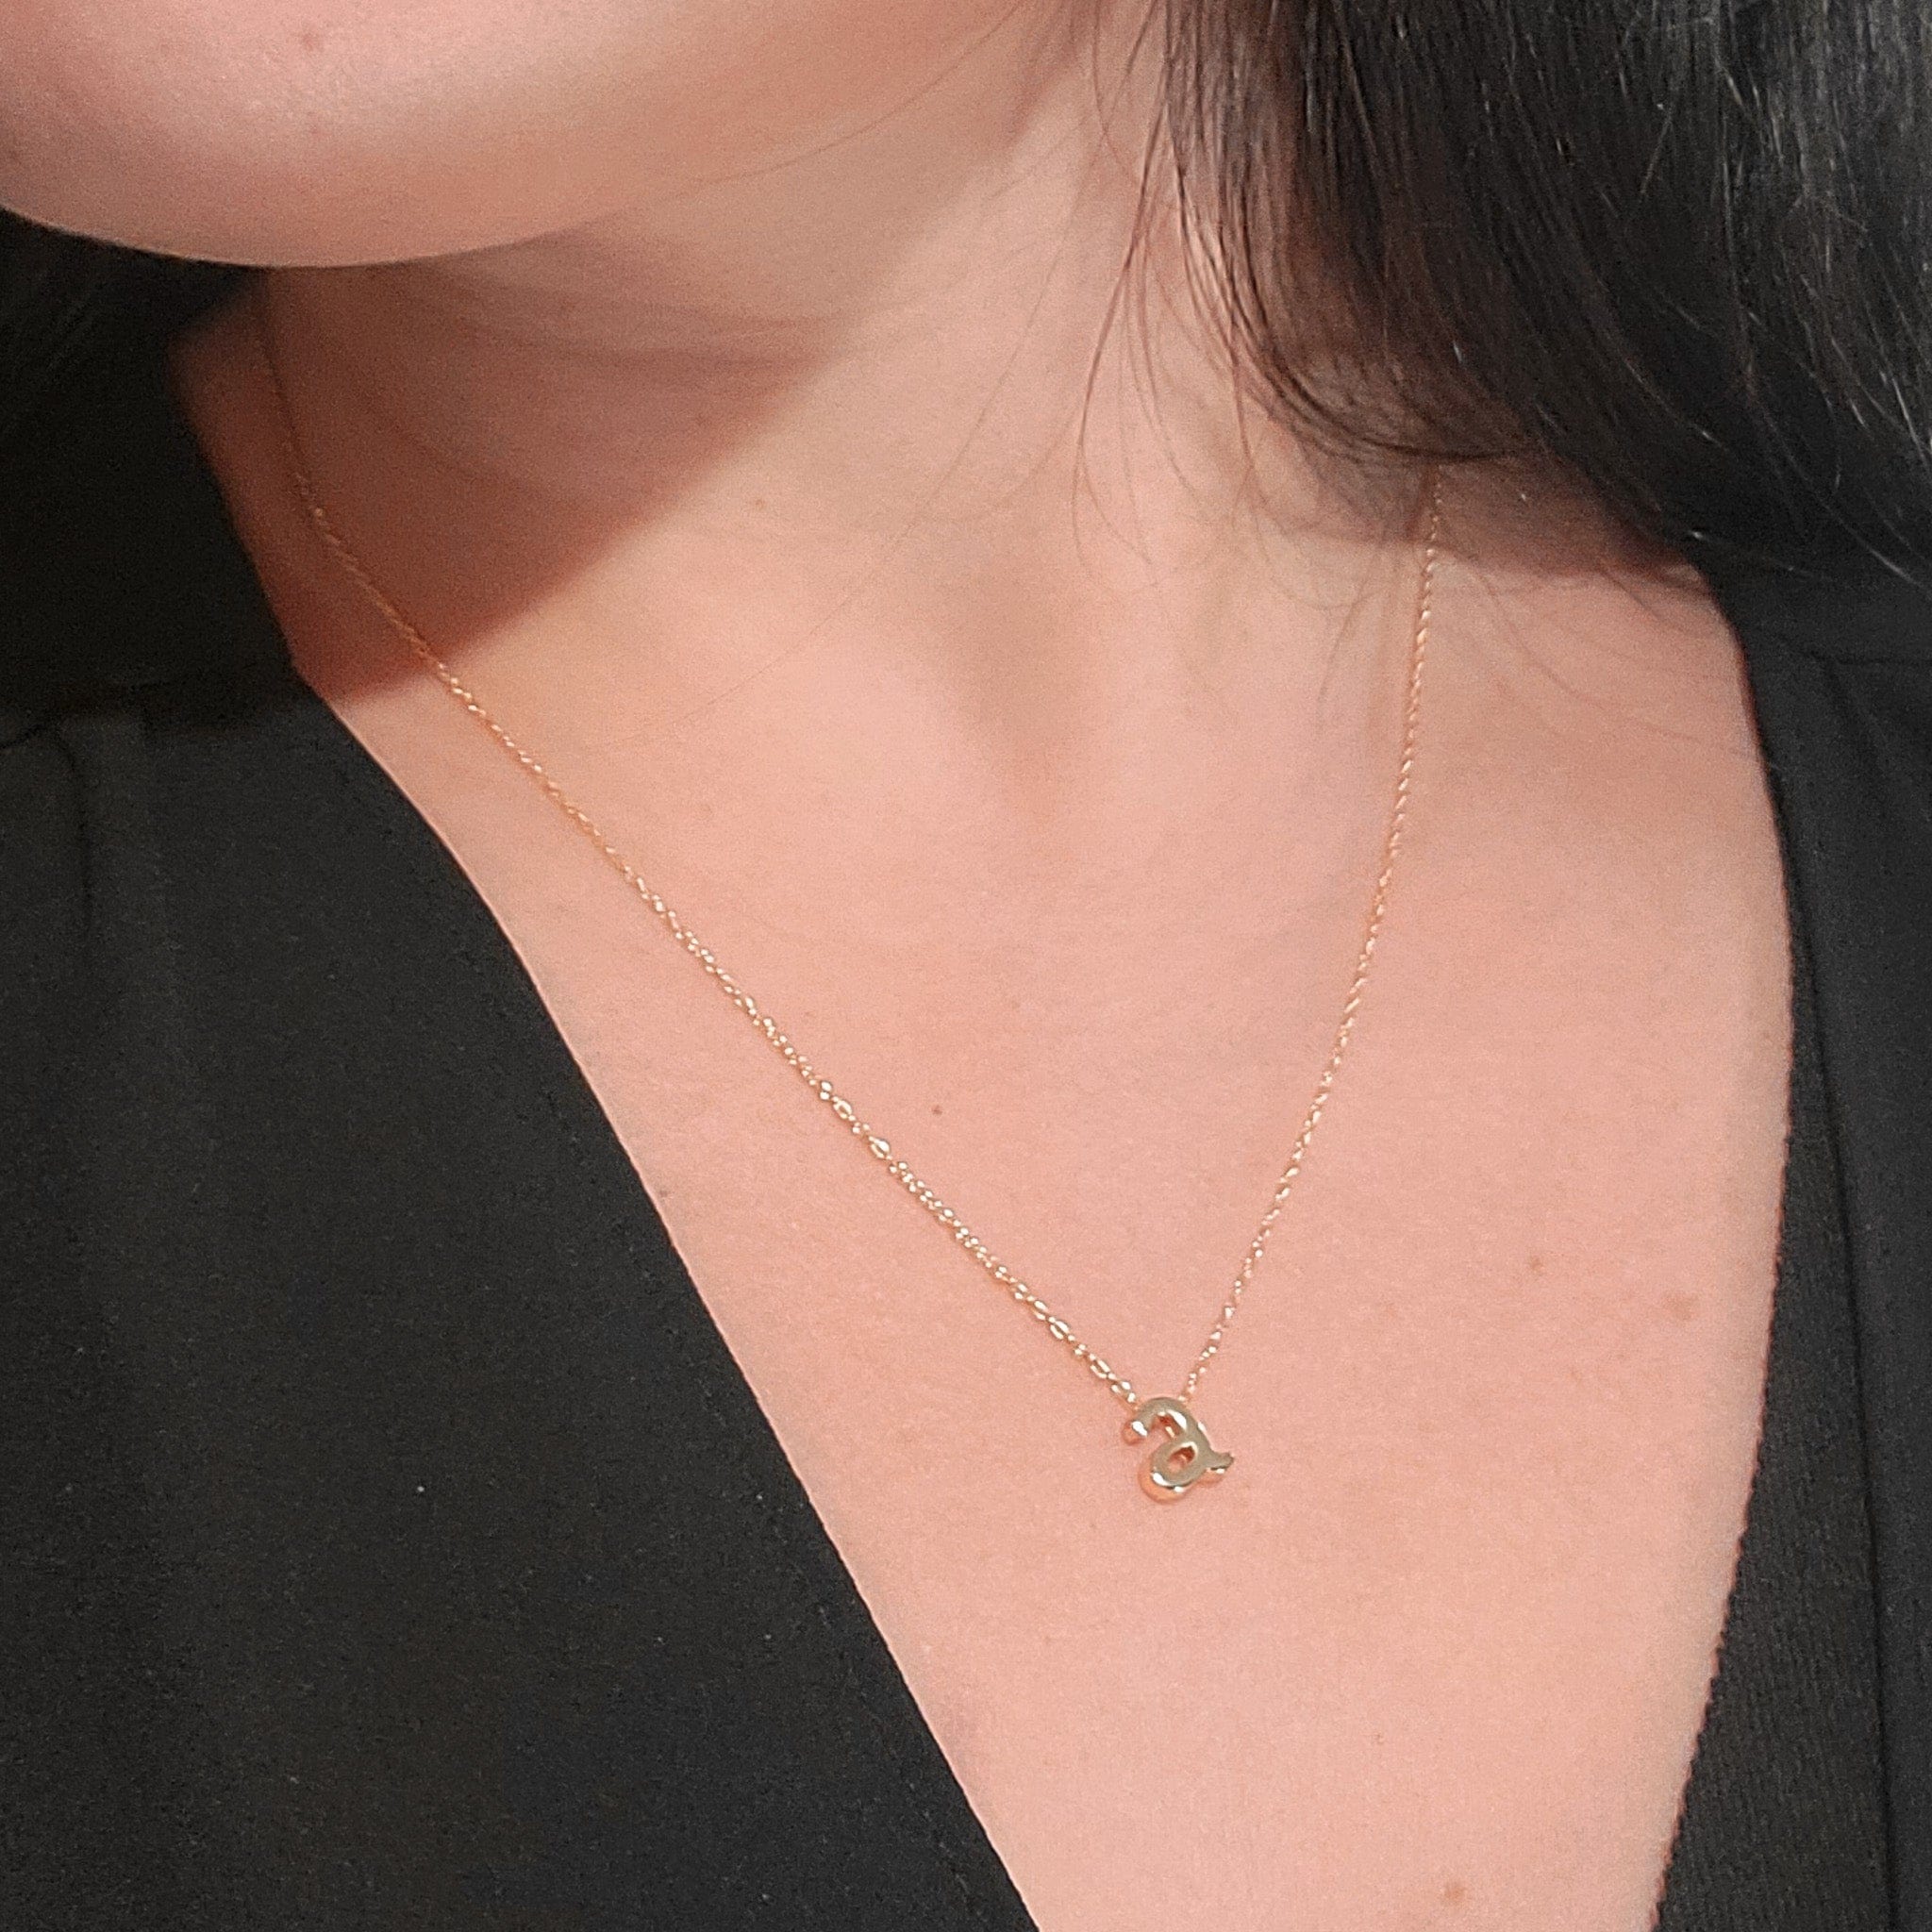 Gold Initials On A Chain Necklace - The Vintage Pearl